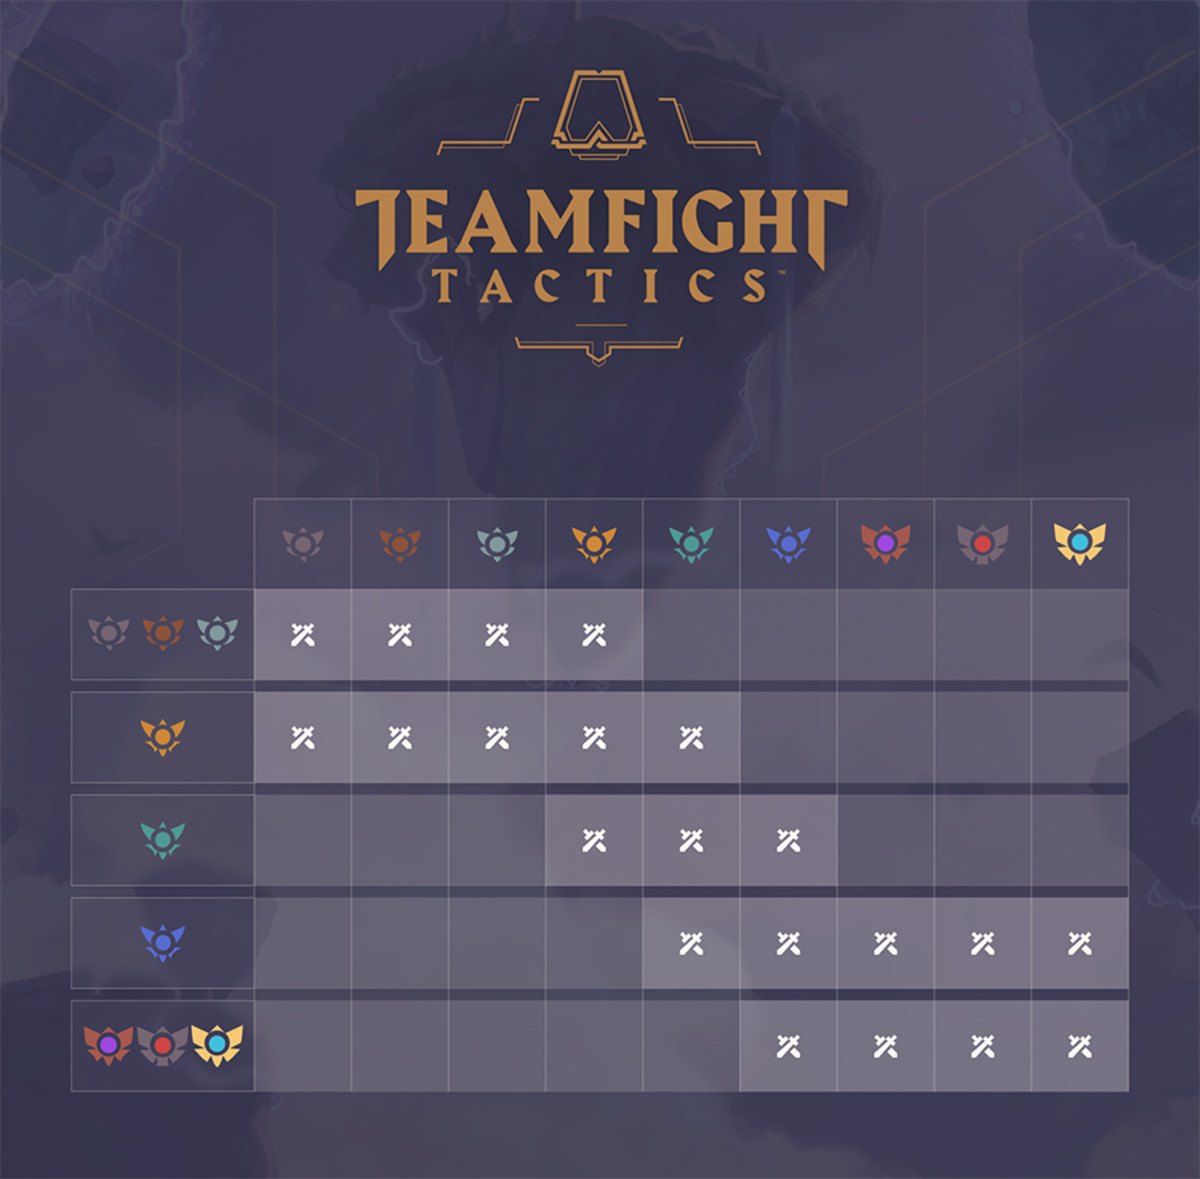 Teamfight Tactics Ranked Party restrictions